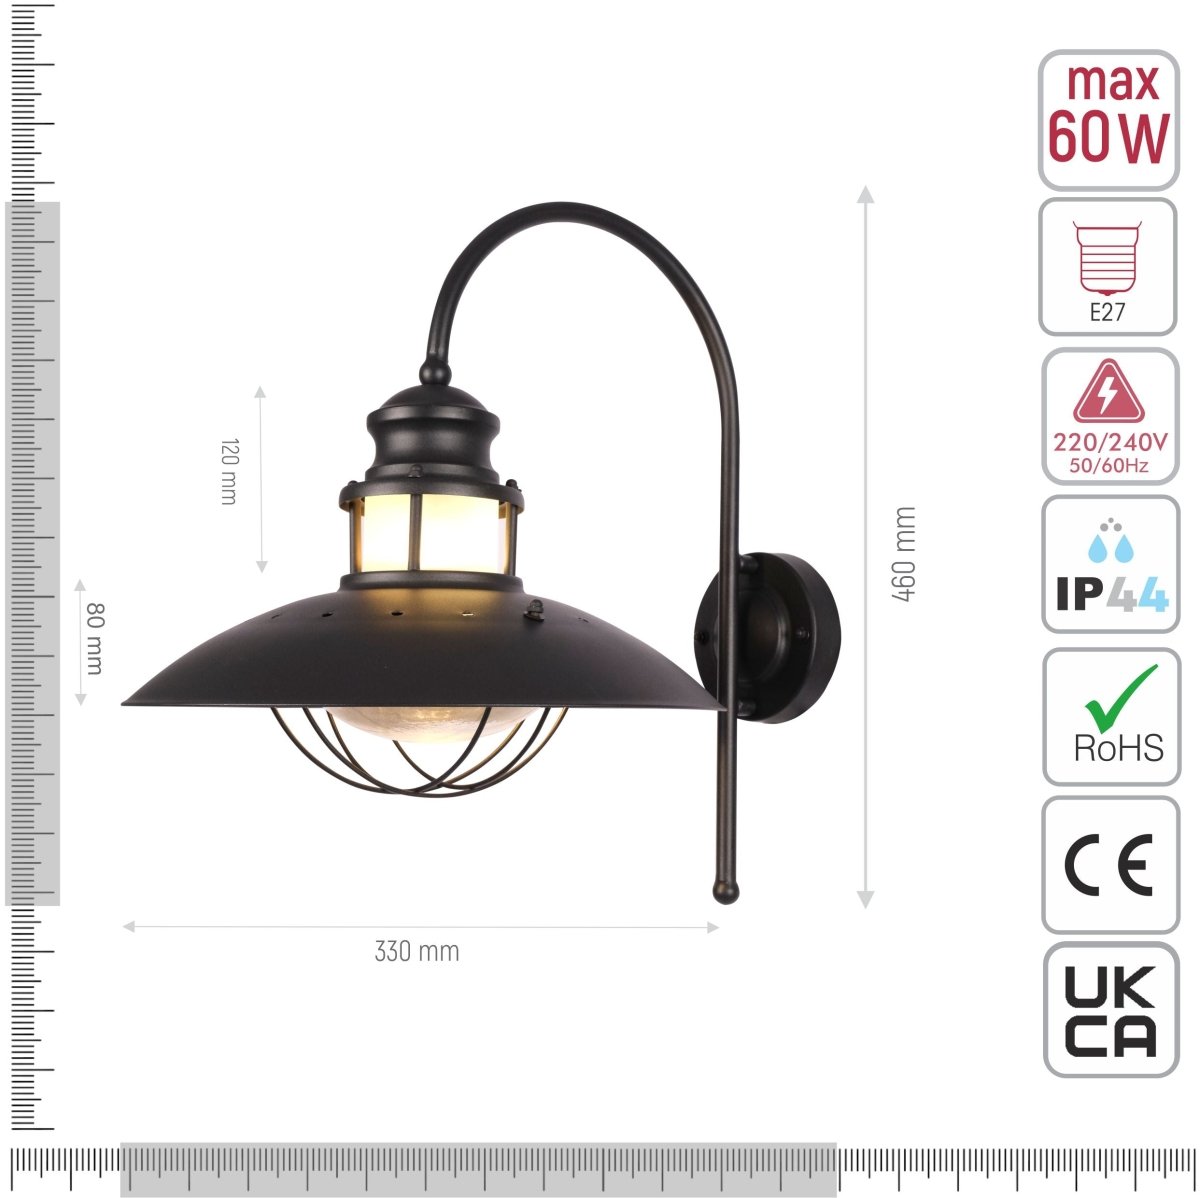 Technical specifications and measurements for Sunflower Wall Lamp Matt Black Clear Glass E27